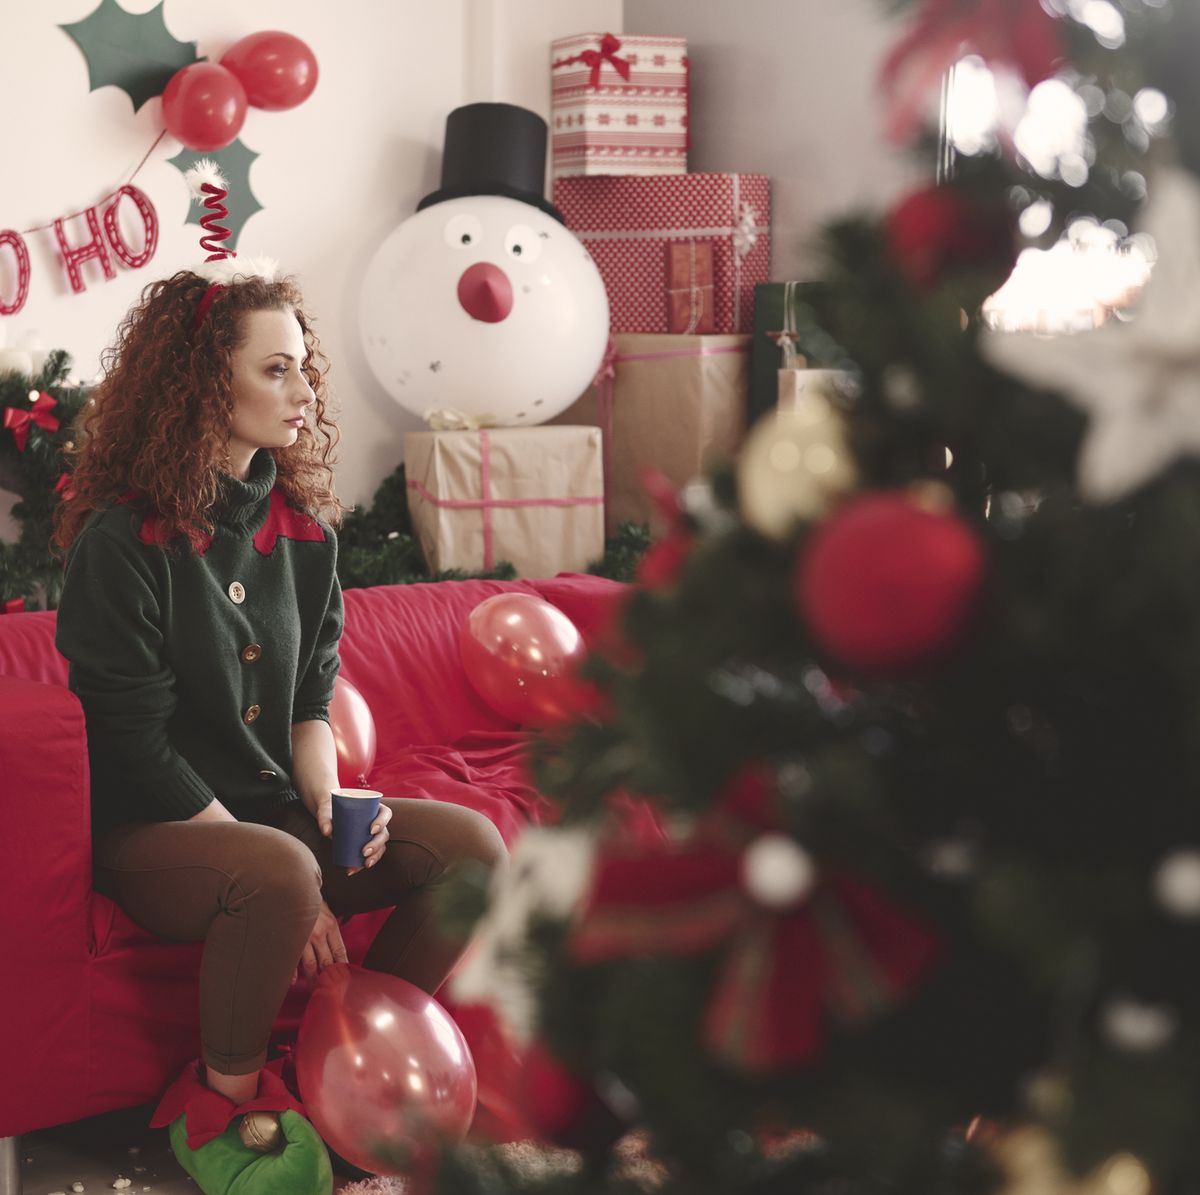 https://hips.hearstapps.com/hmg-prod/images/sad-young-woman-sitting-alone-on-sofa-at-christmas-royalty-free-image-1568829463.jpg?crop=0.670xw:1.00xh;0.154xw,0&resize=1200:*